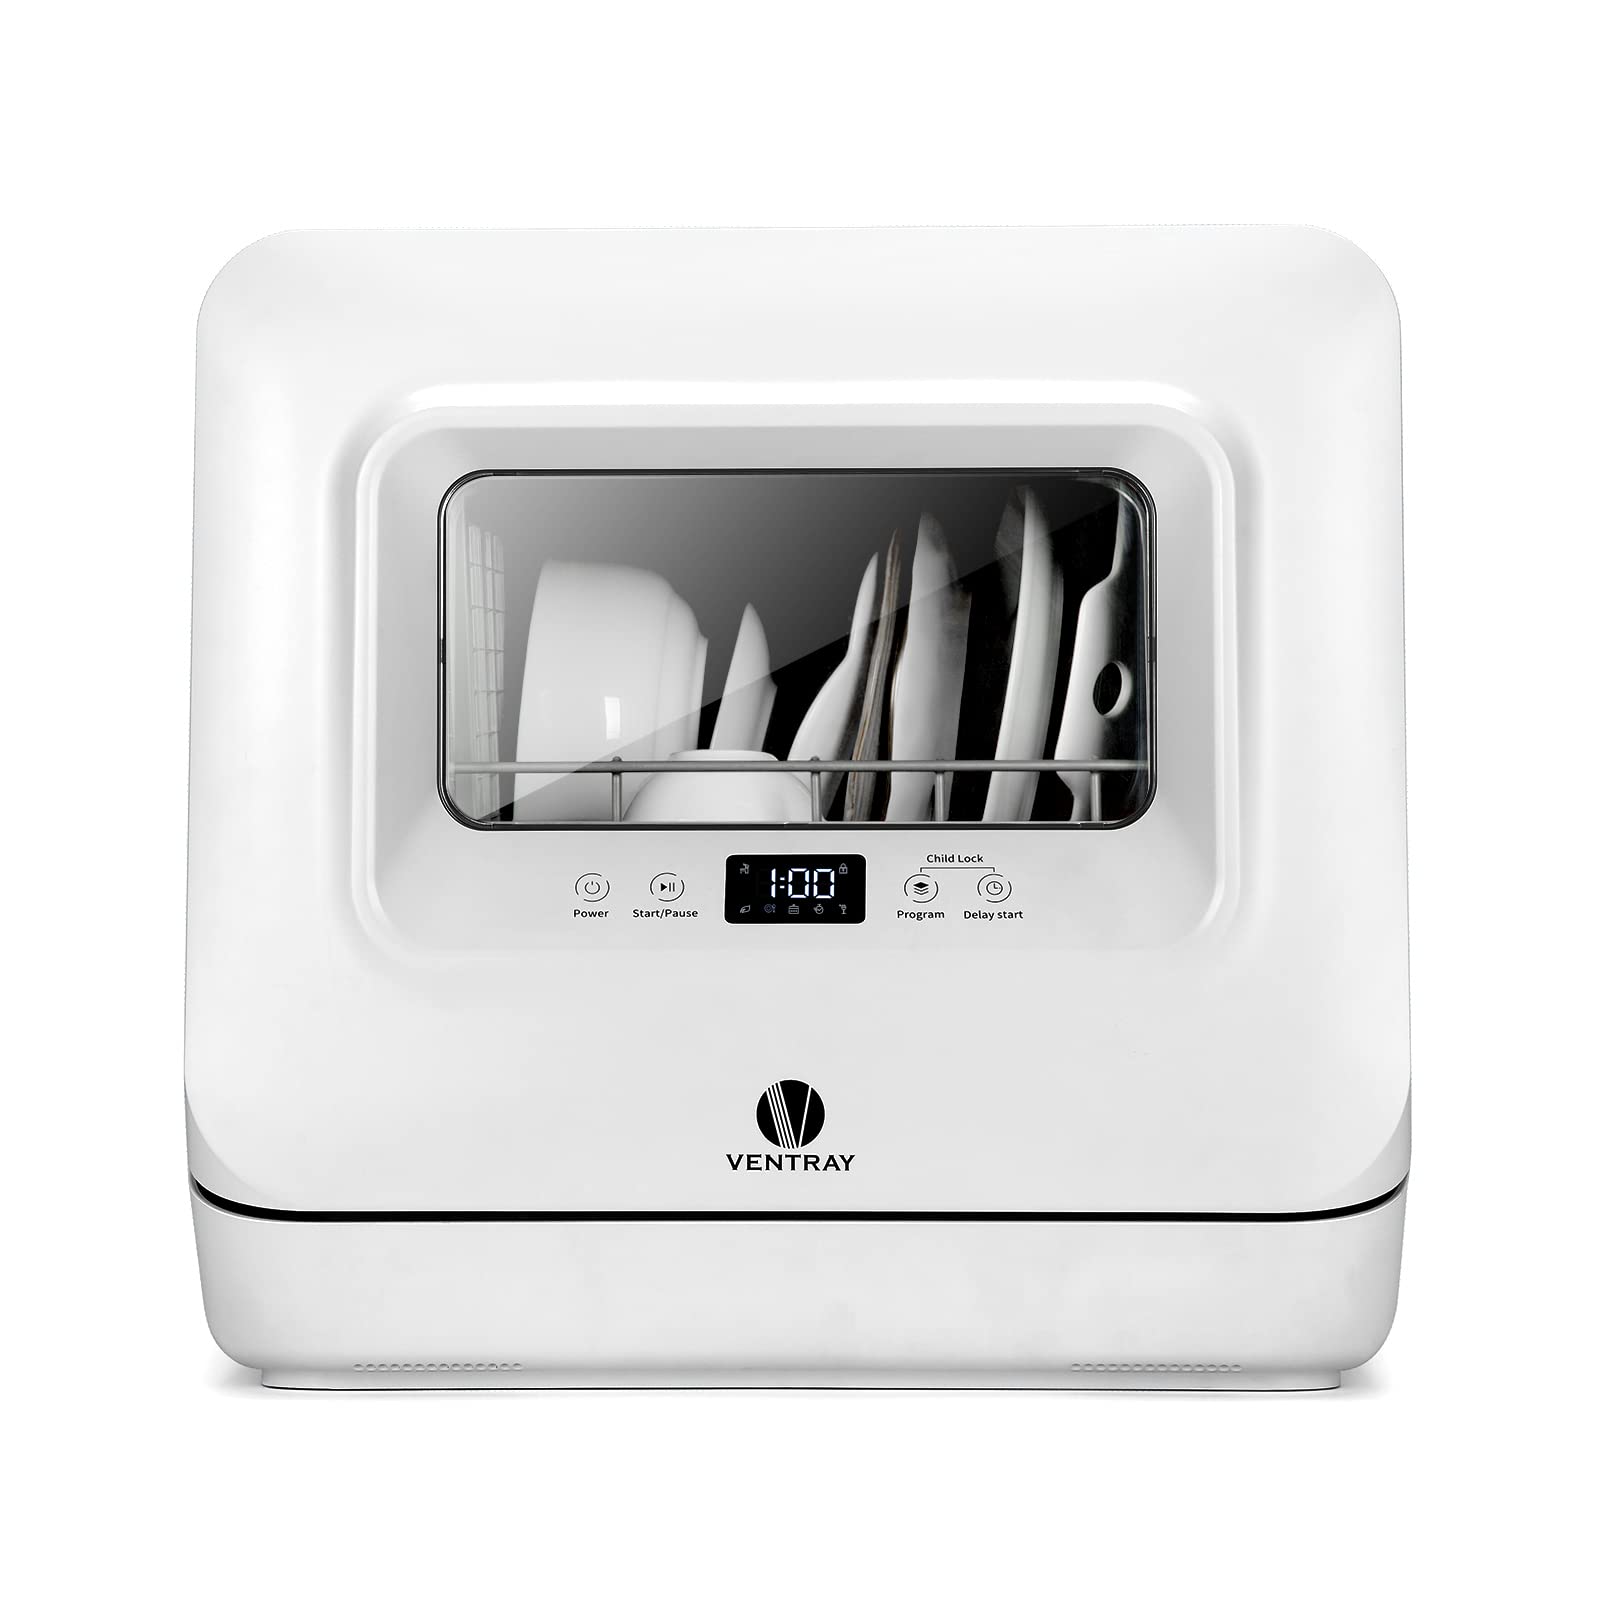 VENTRAY Countertop Portable Dishwasher Mini Compact with 5 Washing Programs LED Digital Display for Small Apartment Dorms RVs DW50 DW50-Without Air Drying Function